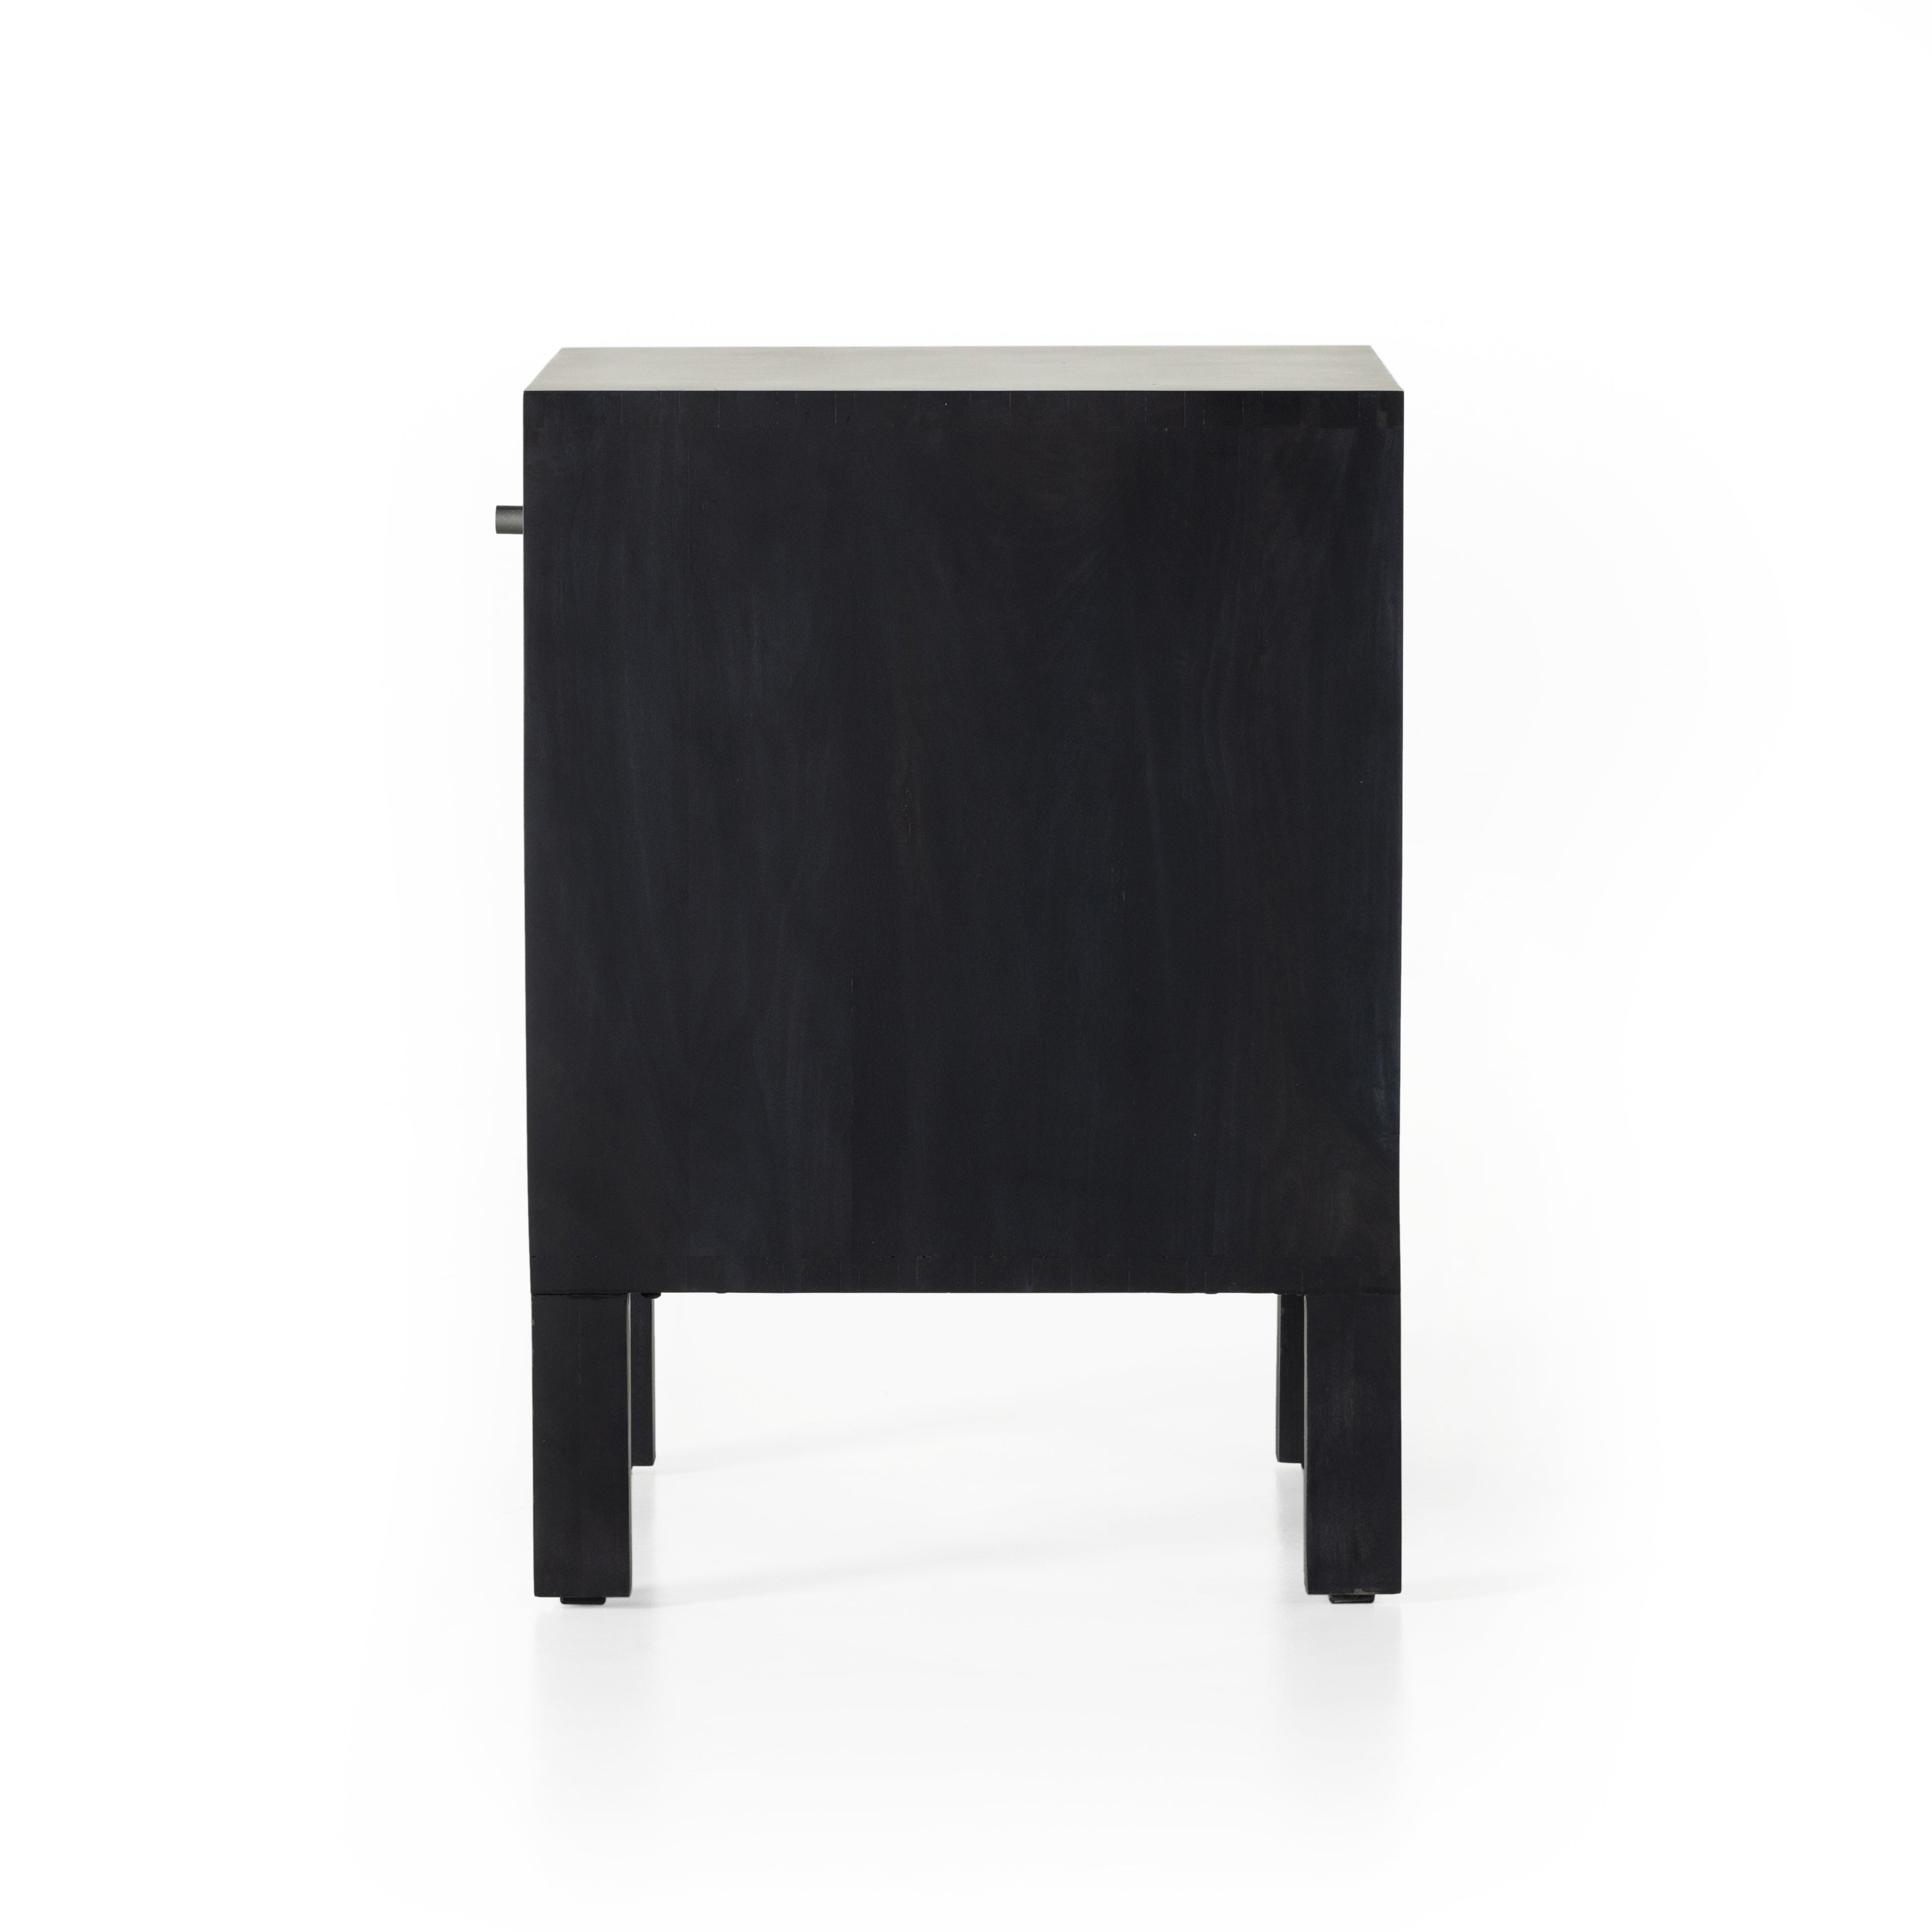 Gather sweet dreams with the Isador Black Wash Poplar Nightstand. The sleek and refined design is perfect for any bedroom. The rich black wash finish creates a timeless look, sure to add elegance and comfort to any décor. Amethyst Home provides interior design, new construction, custom furniture, and area rugs in the Park City metro area.